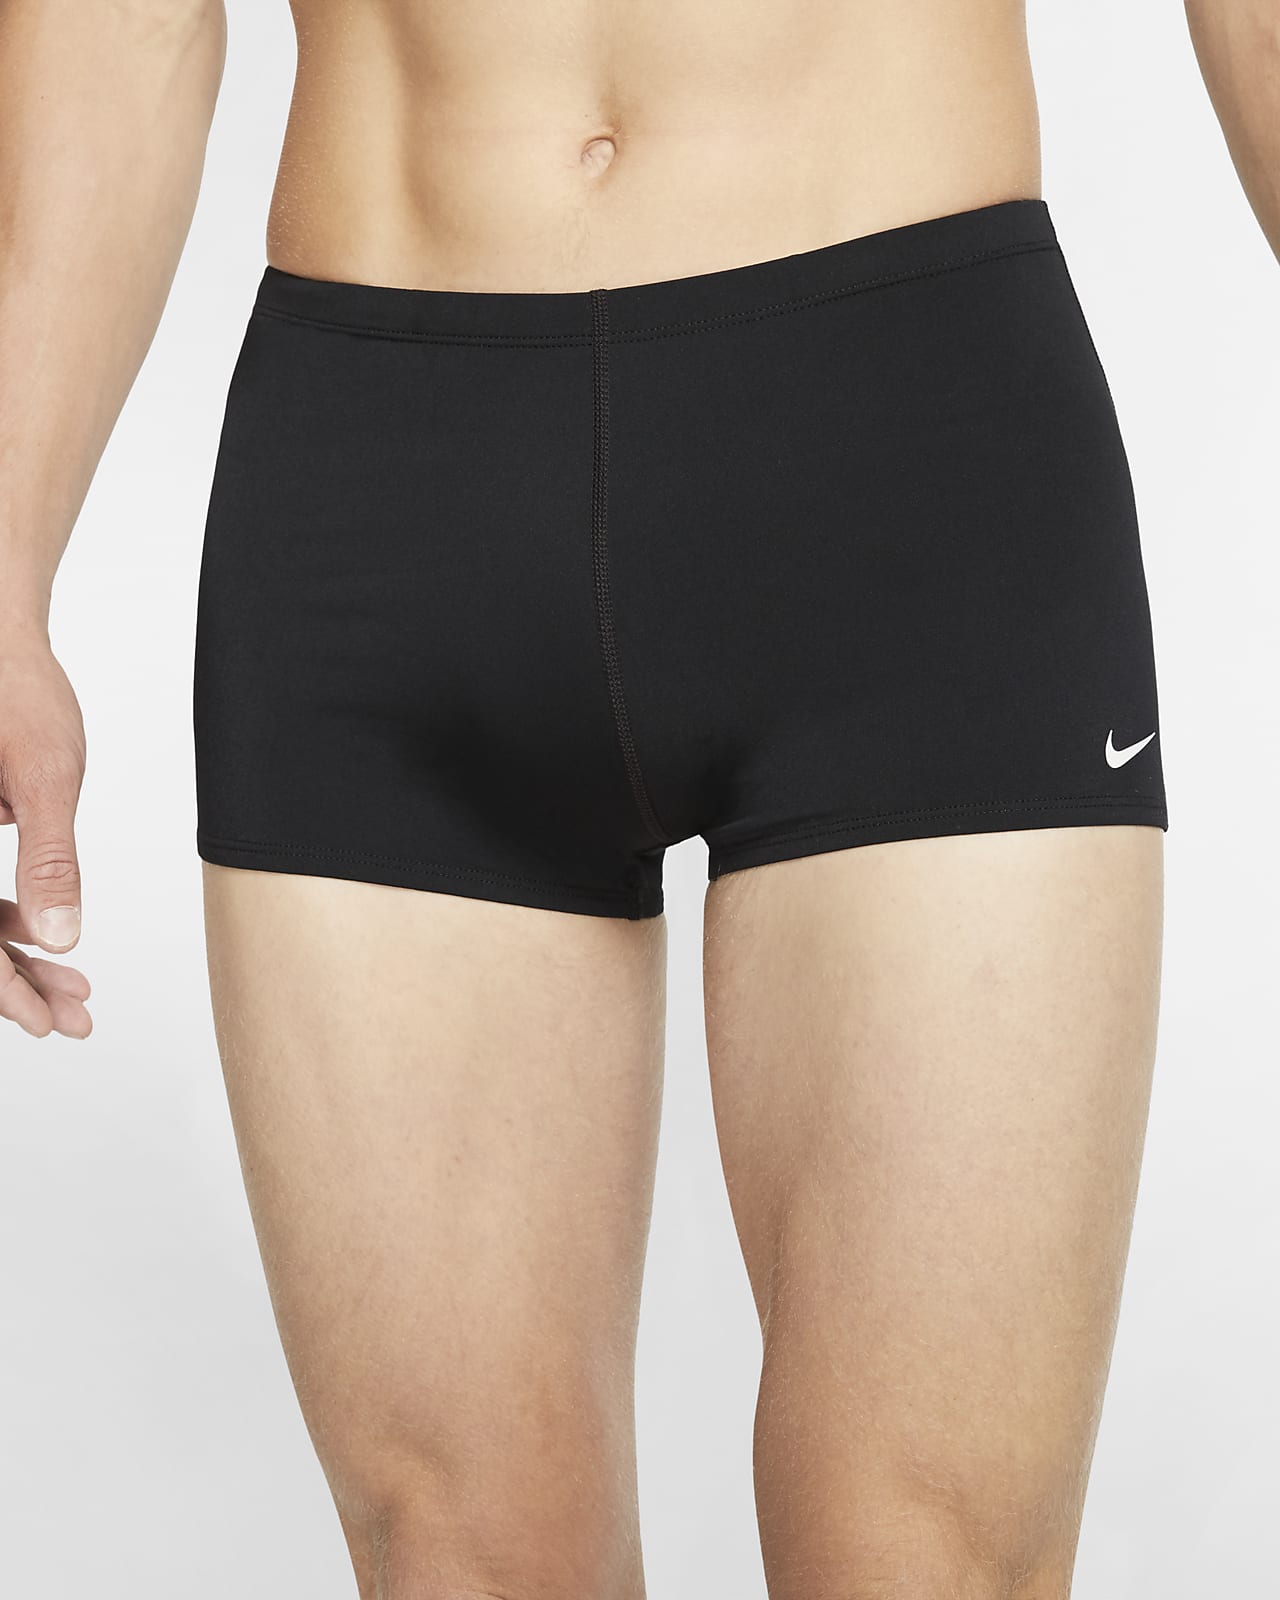 Nike Men's HydraStrong Colorblock Brief Swimsuit at